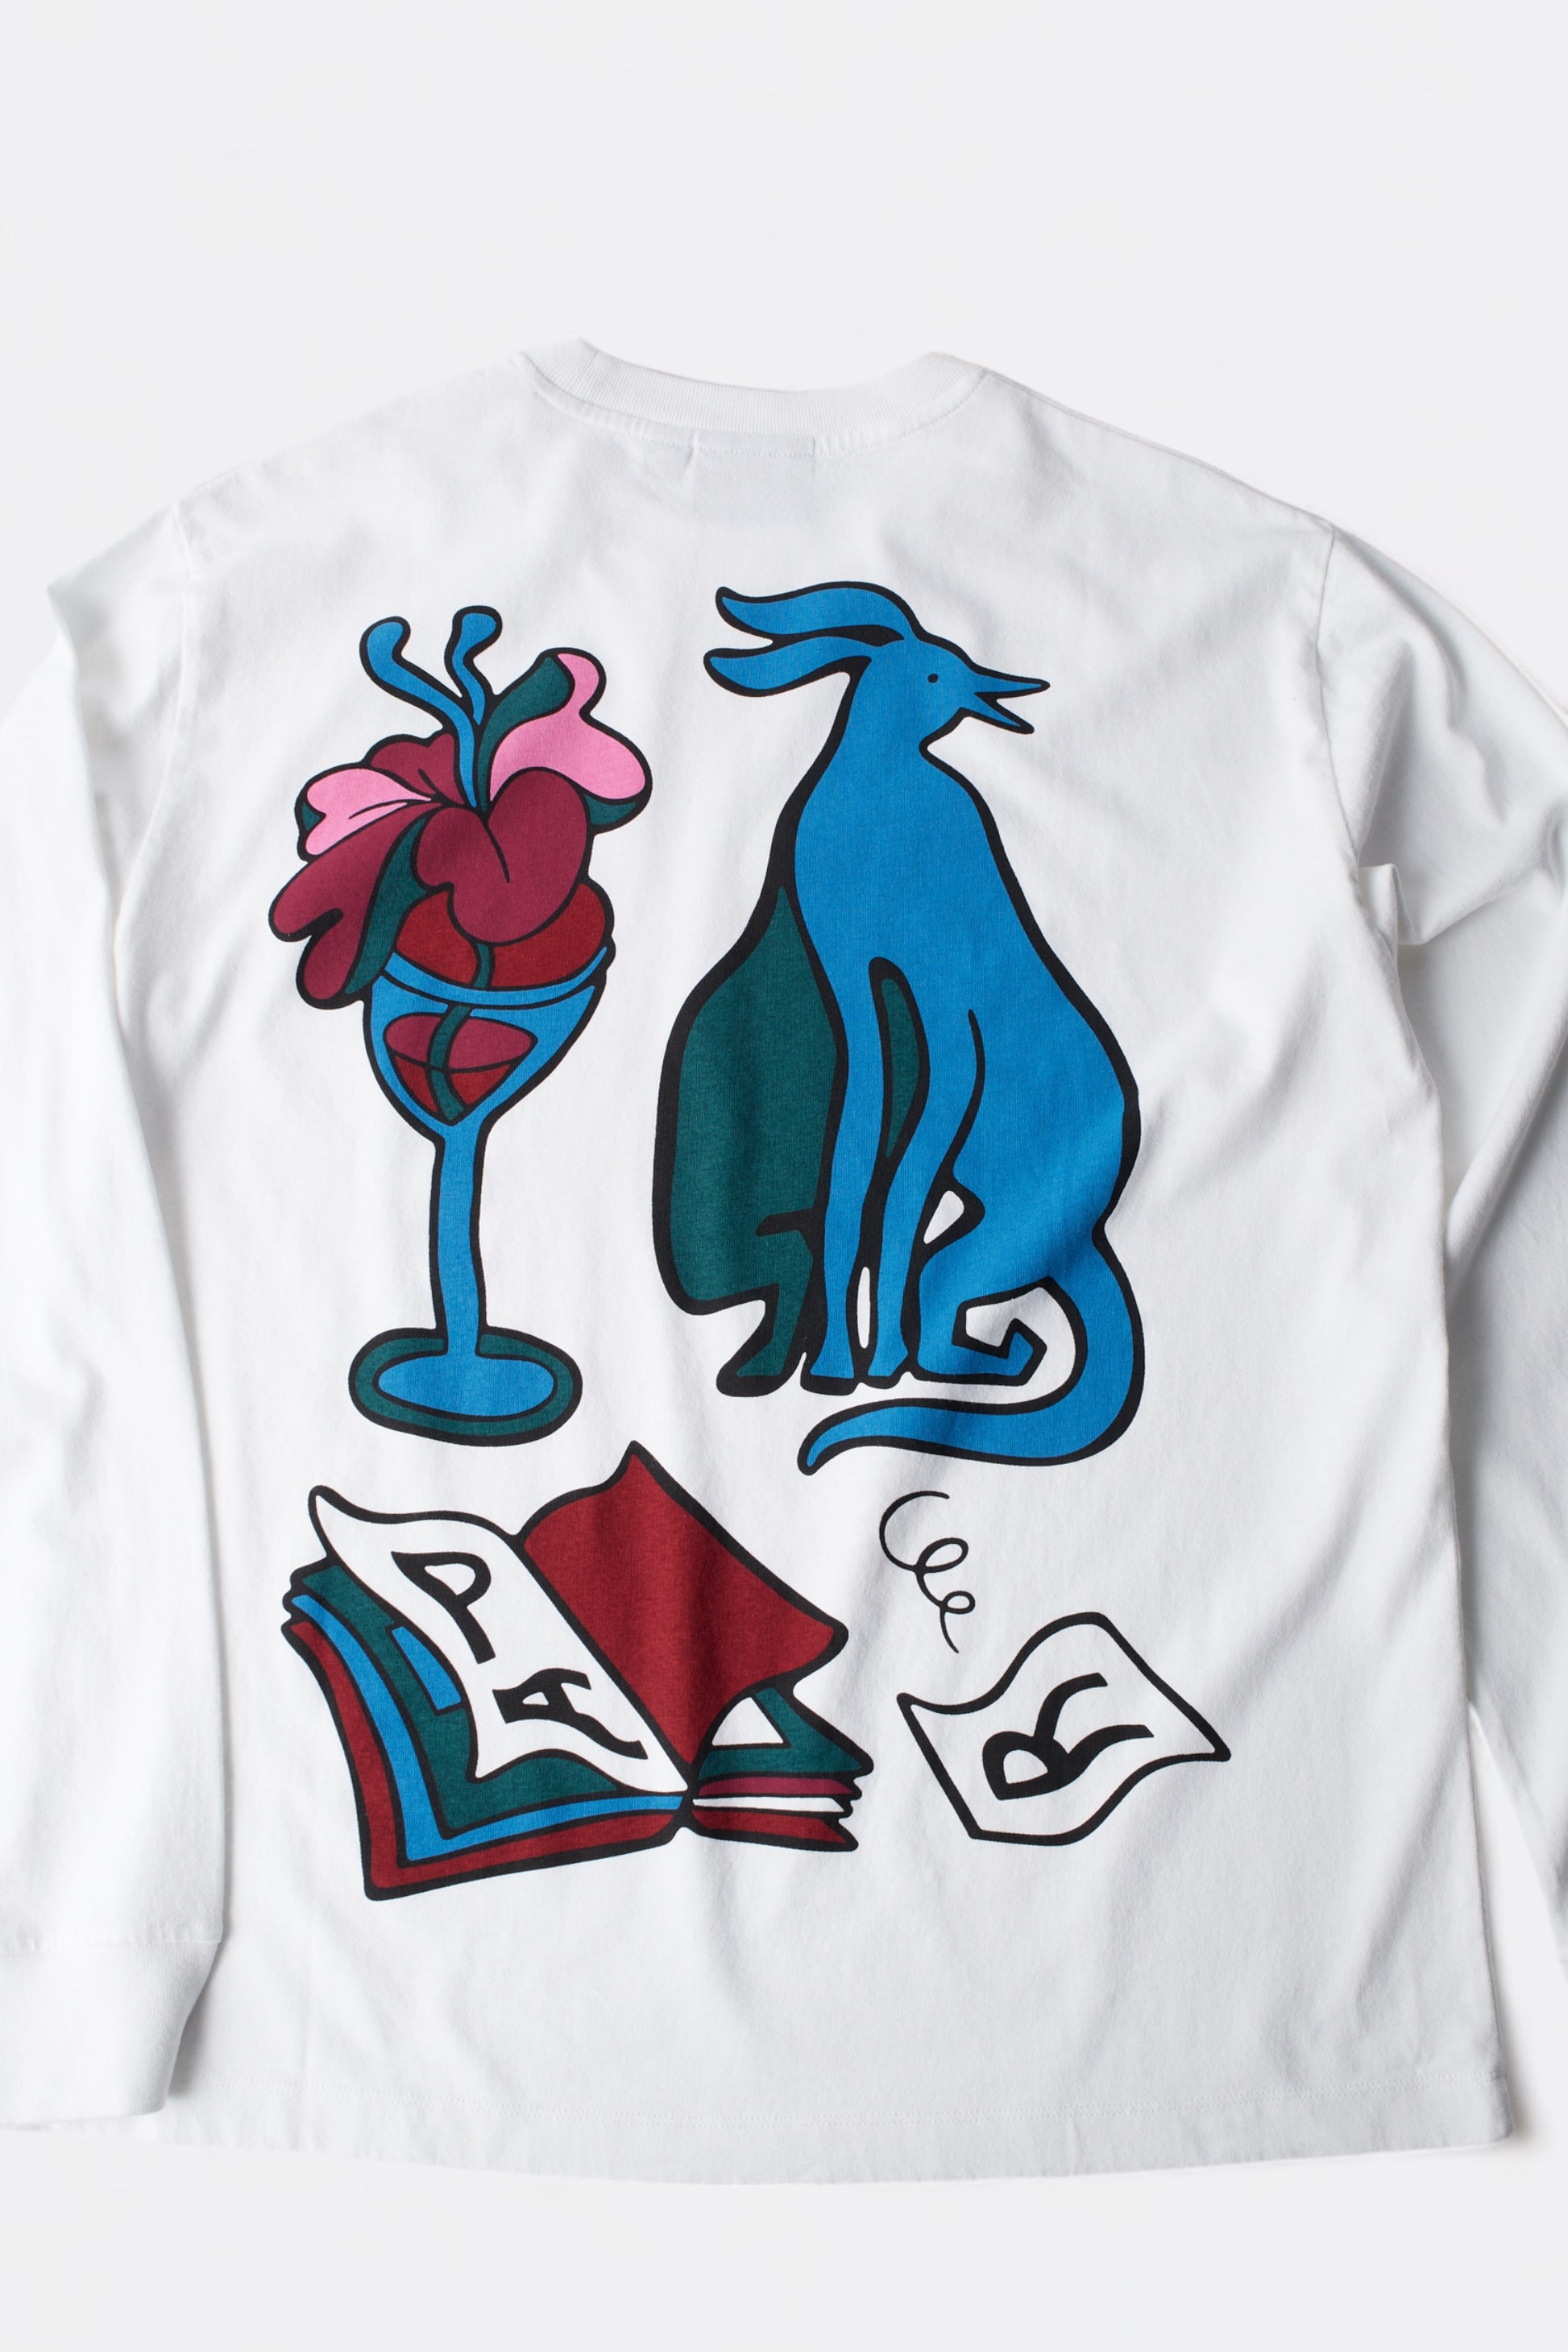 Parra - Wine And Books Long Sleeve T-Shirt (White)